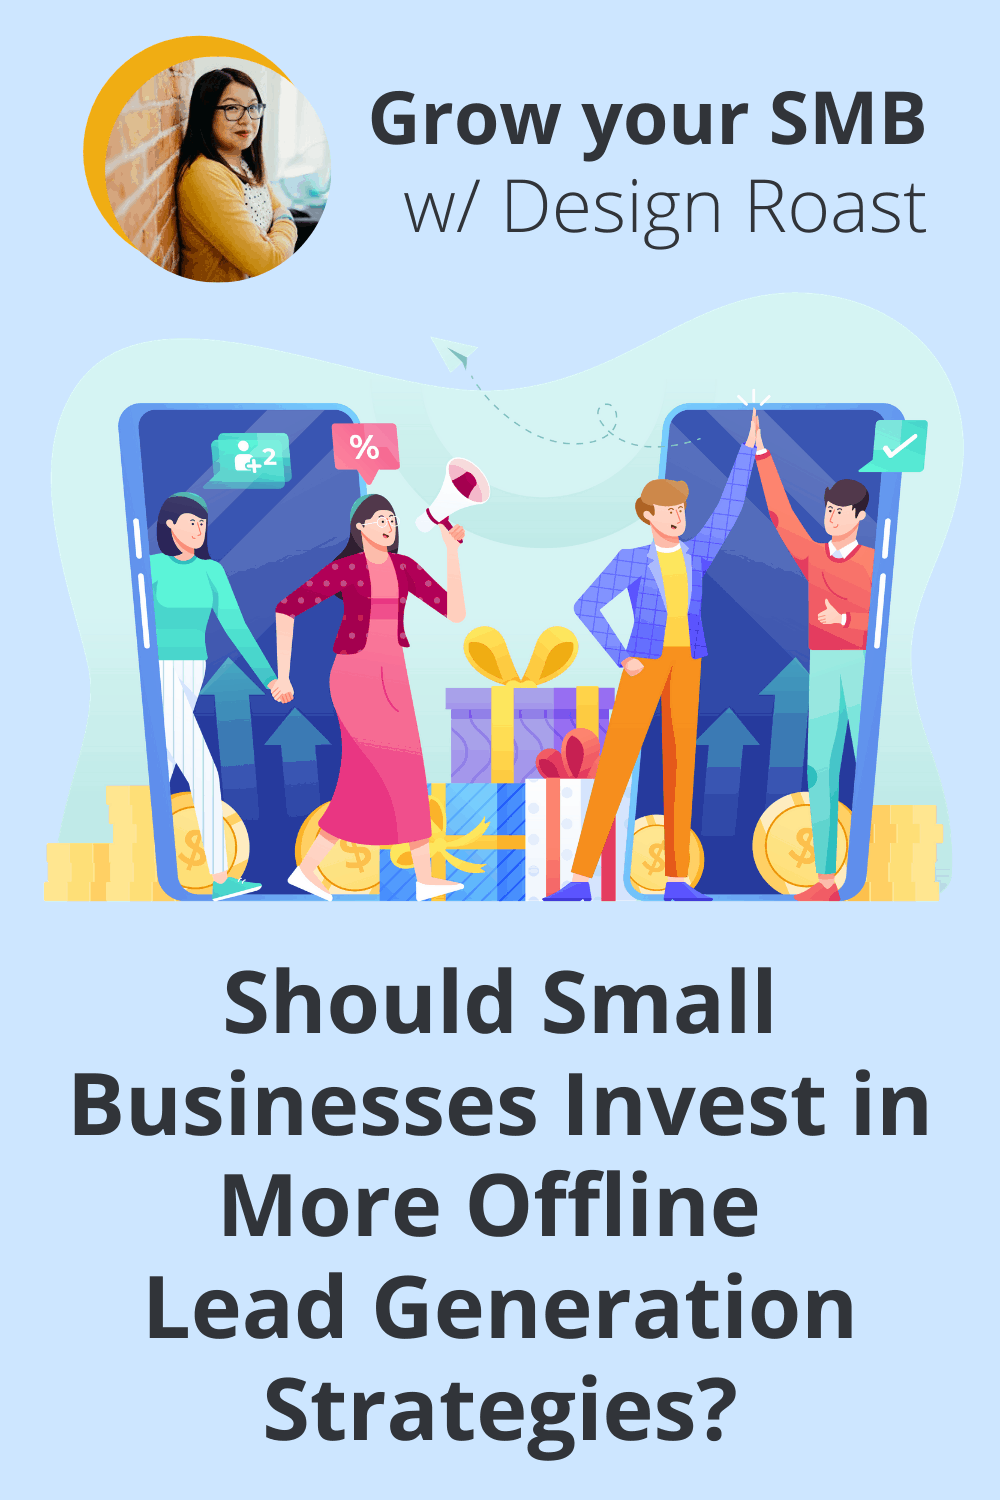 While online strategies are great for reaching a target audience, ignoring offline lead generation may impact your bottom line, especially in service or retail industries. via @scopedesign